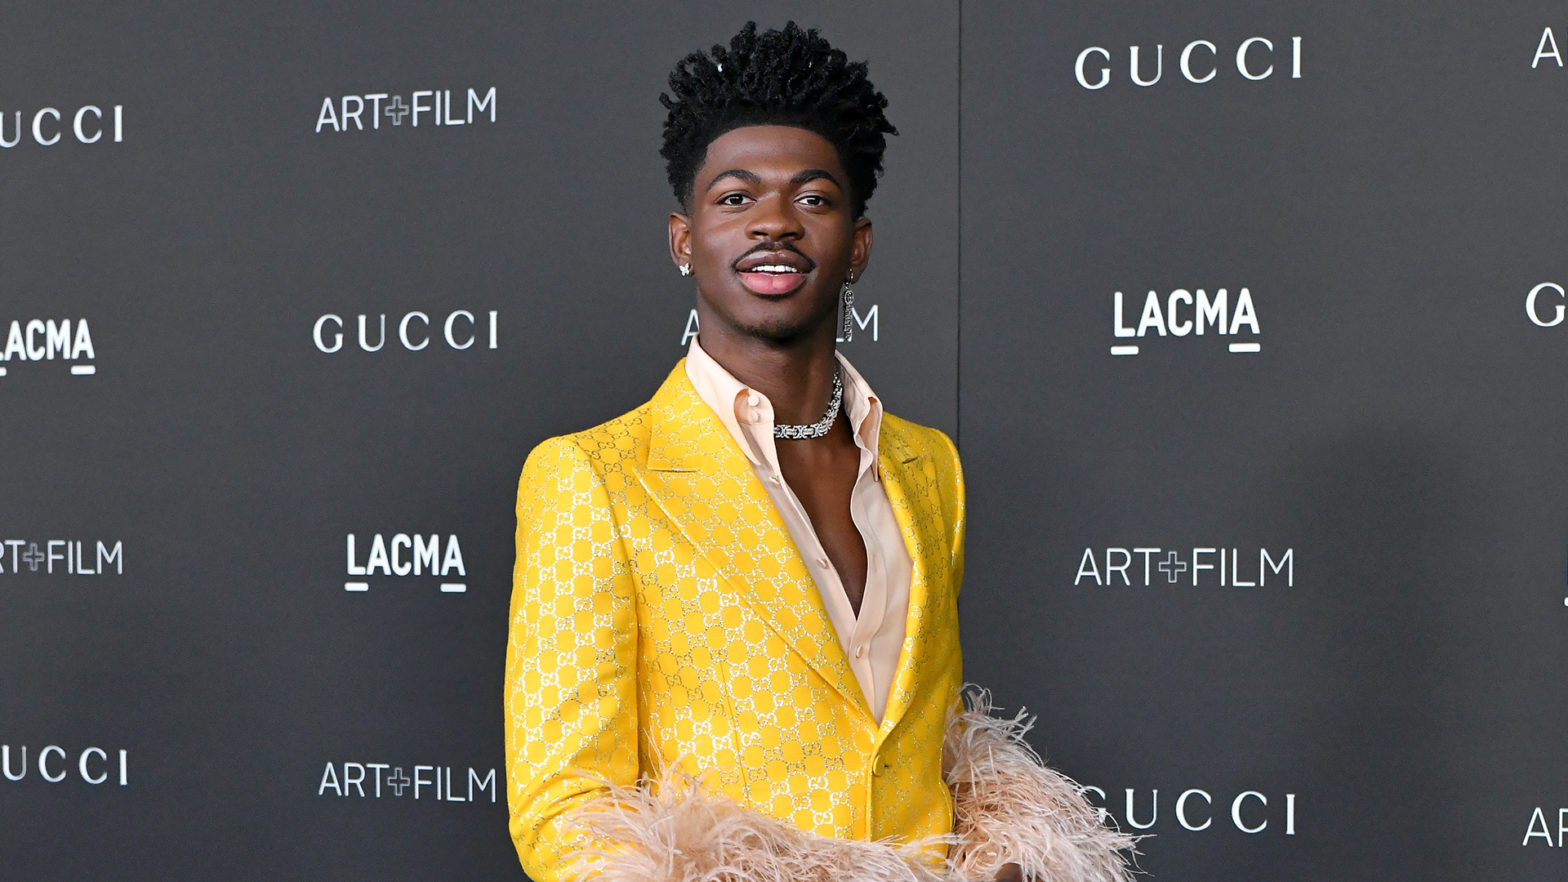 Lil Nas X, Cash App To Give Away $1M To Help Young People 'Take Control Of Their Financial Futures'